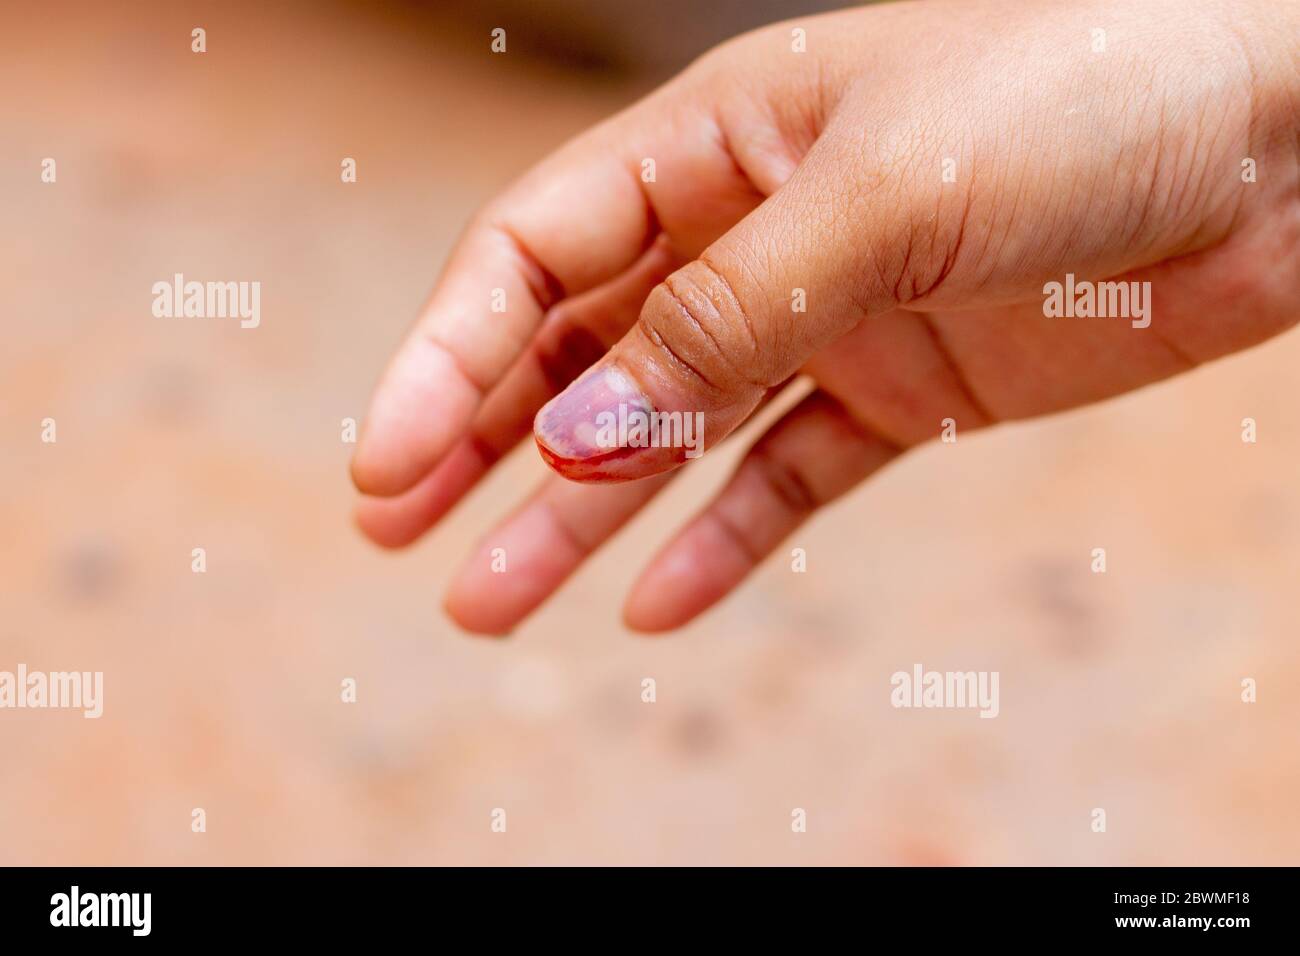 Small wound on the finger, fresh blood after injury, close up, bleeding  Stock Photo - Alamy